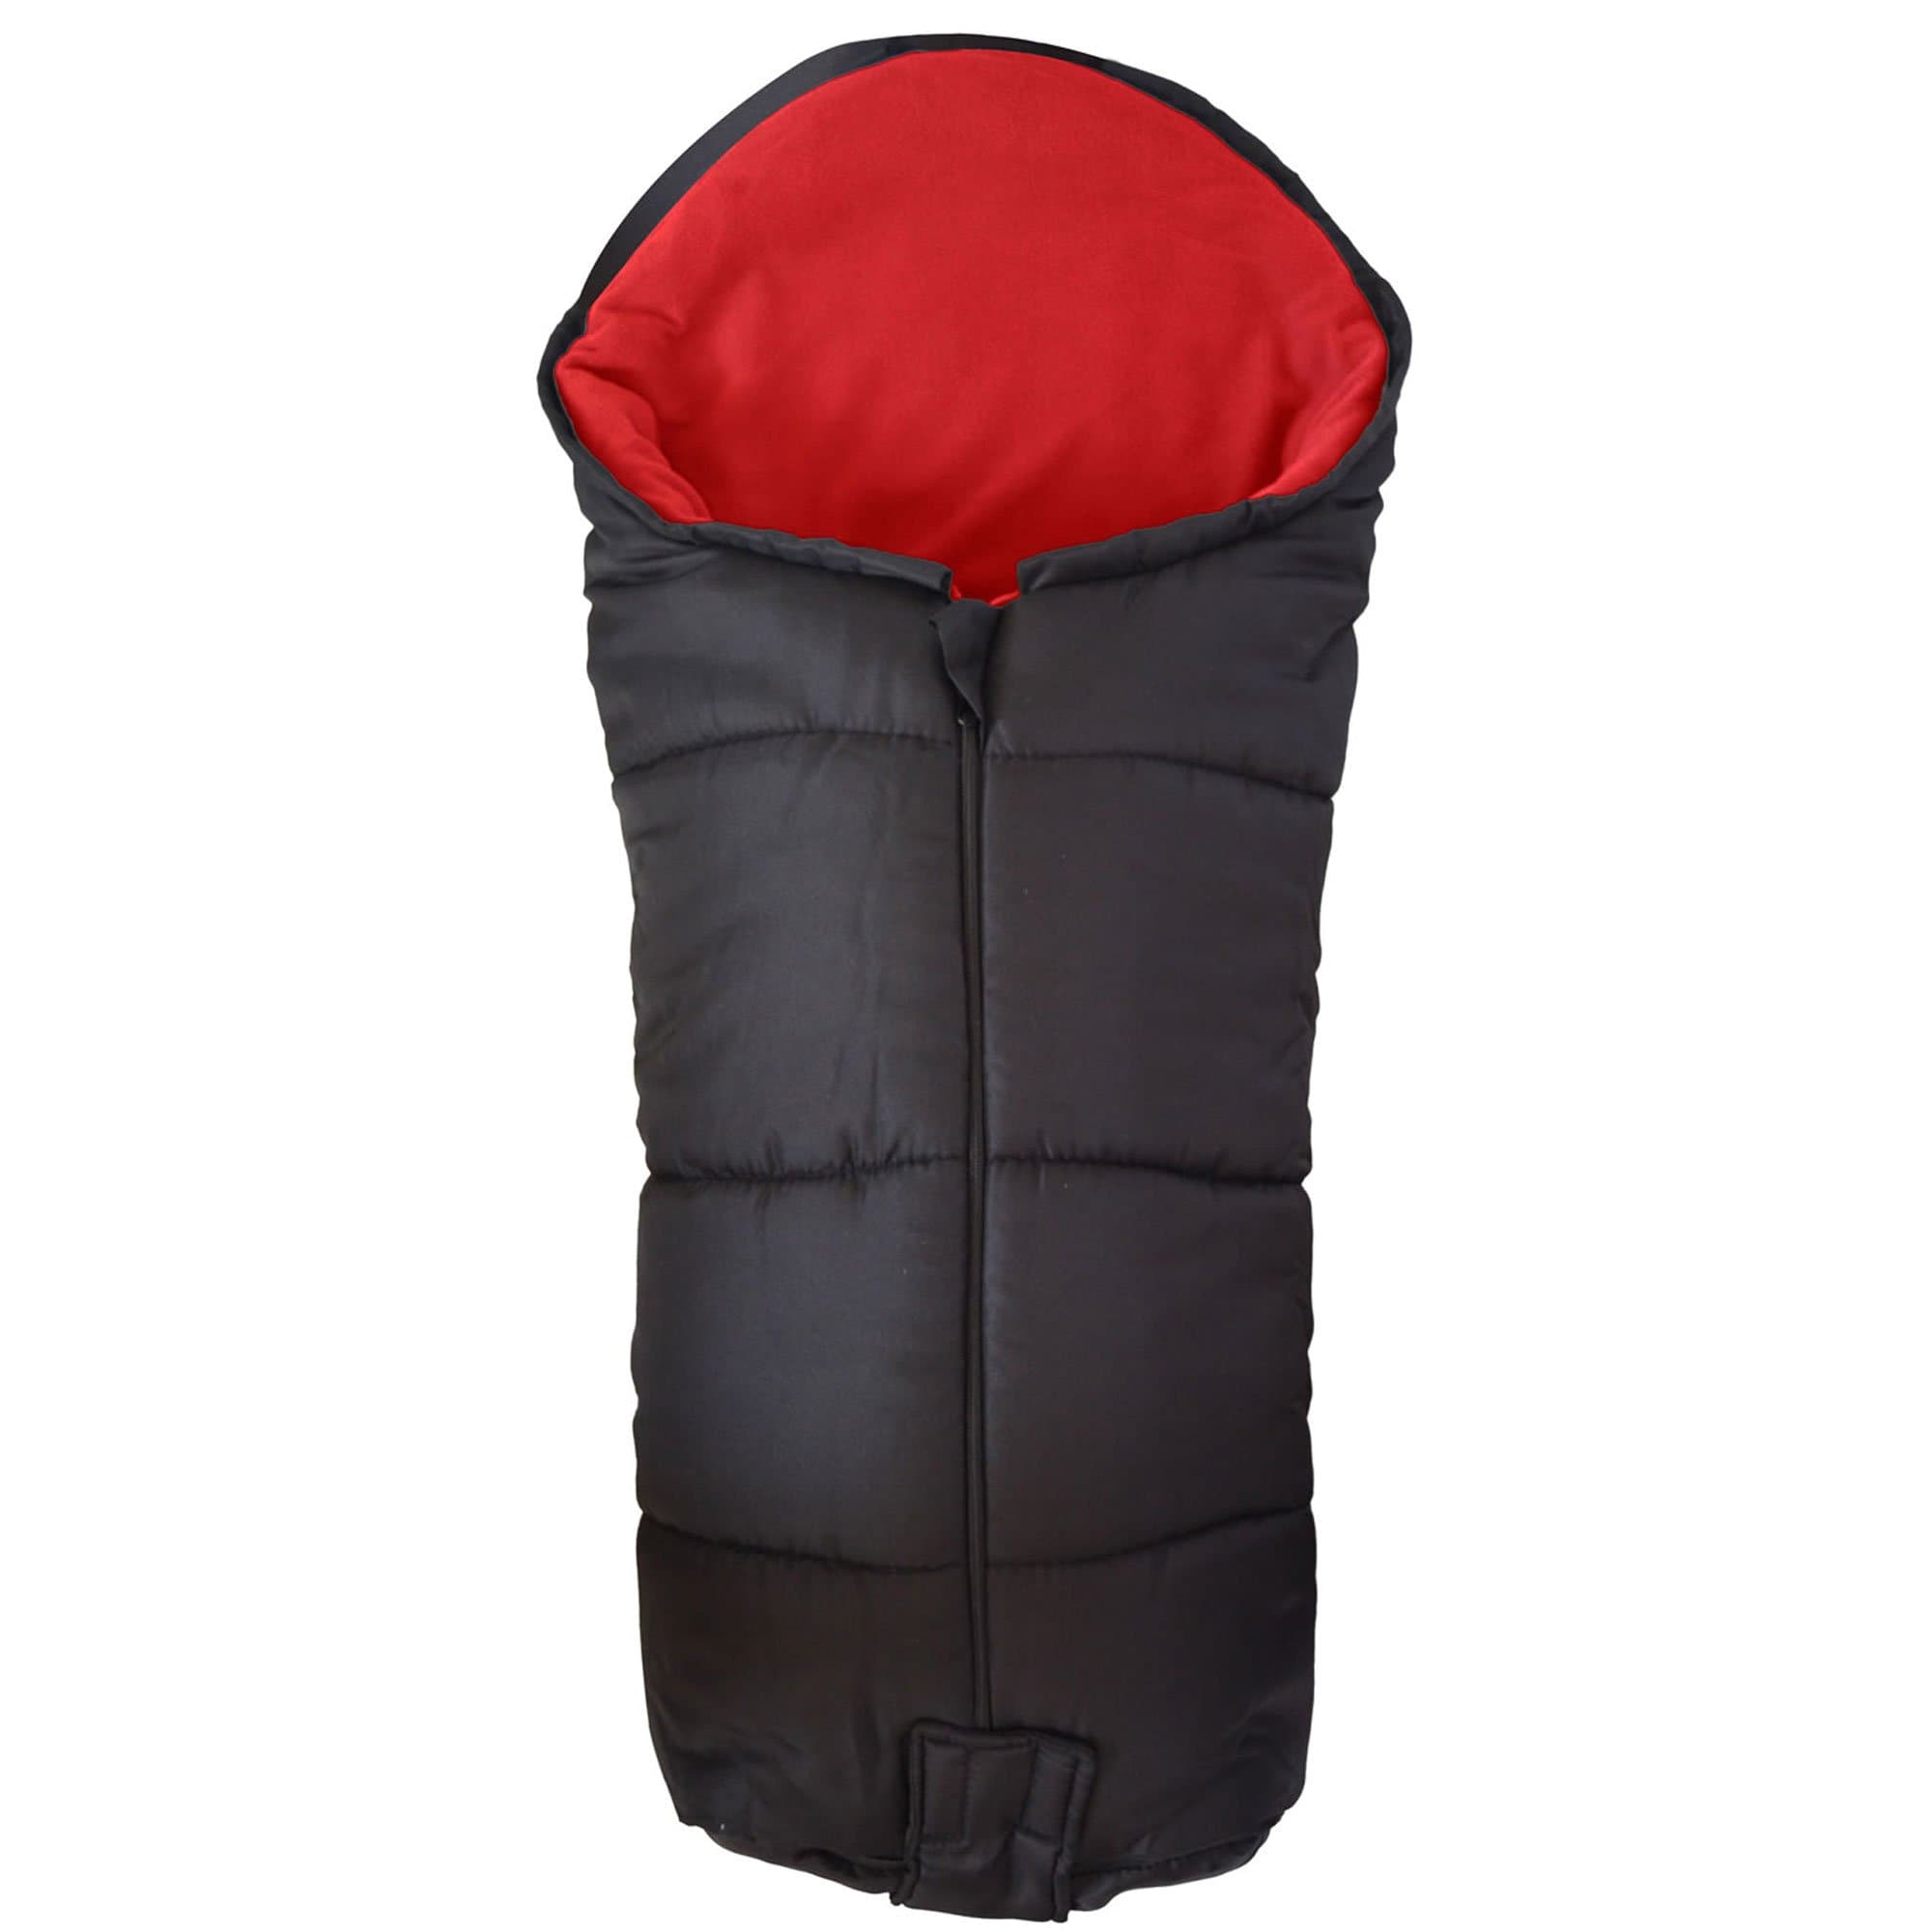 Deluxe Footmuff / Cosy Toes Compatible with Babyzen - Red / Fits All Models | For Your Little One